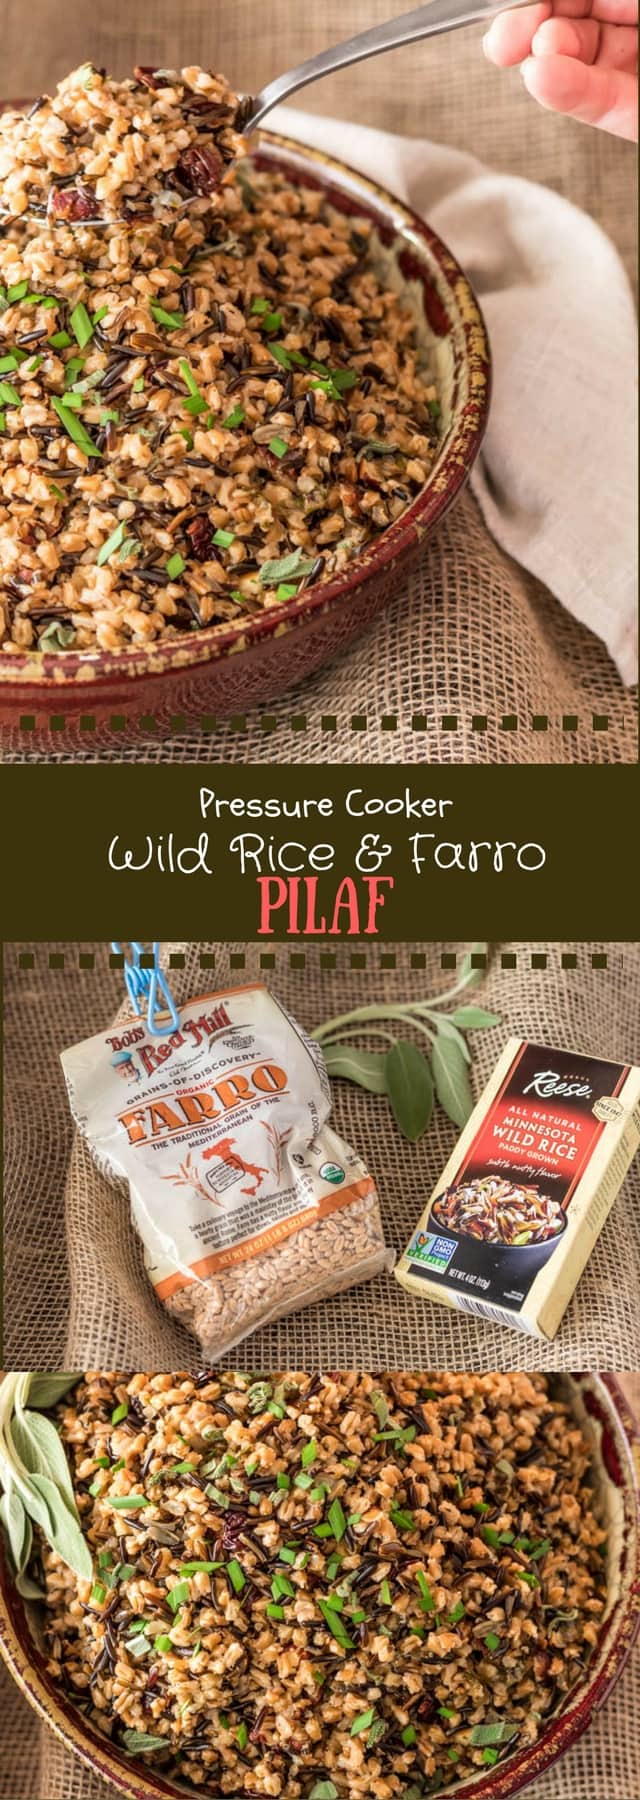 Pressure Cooker Wild Rice and Farro Pilaf photo collage